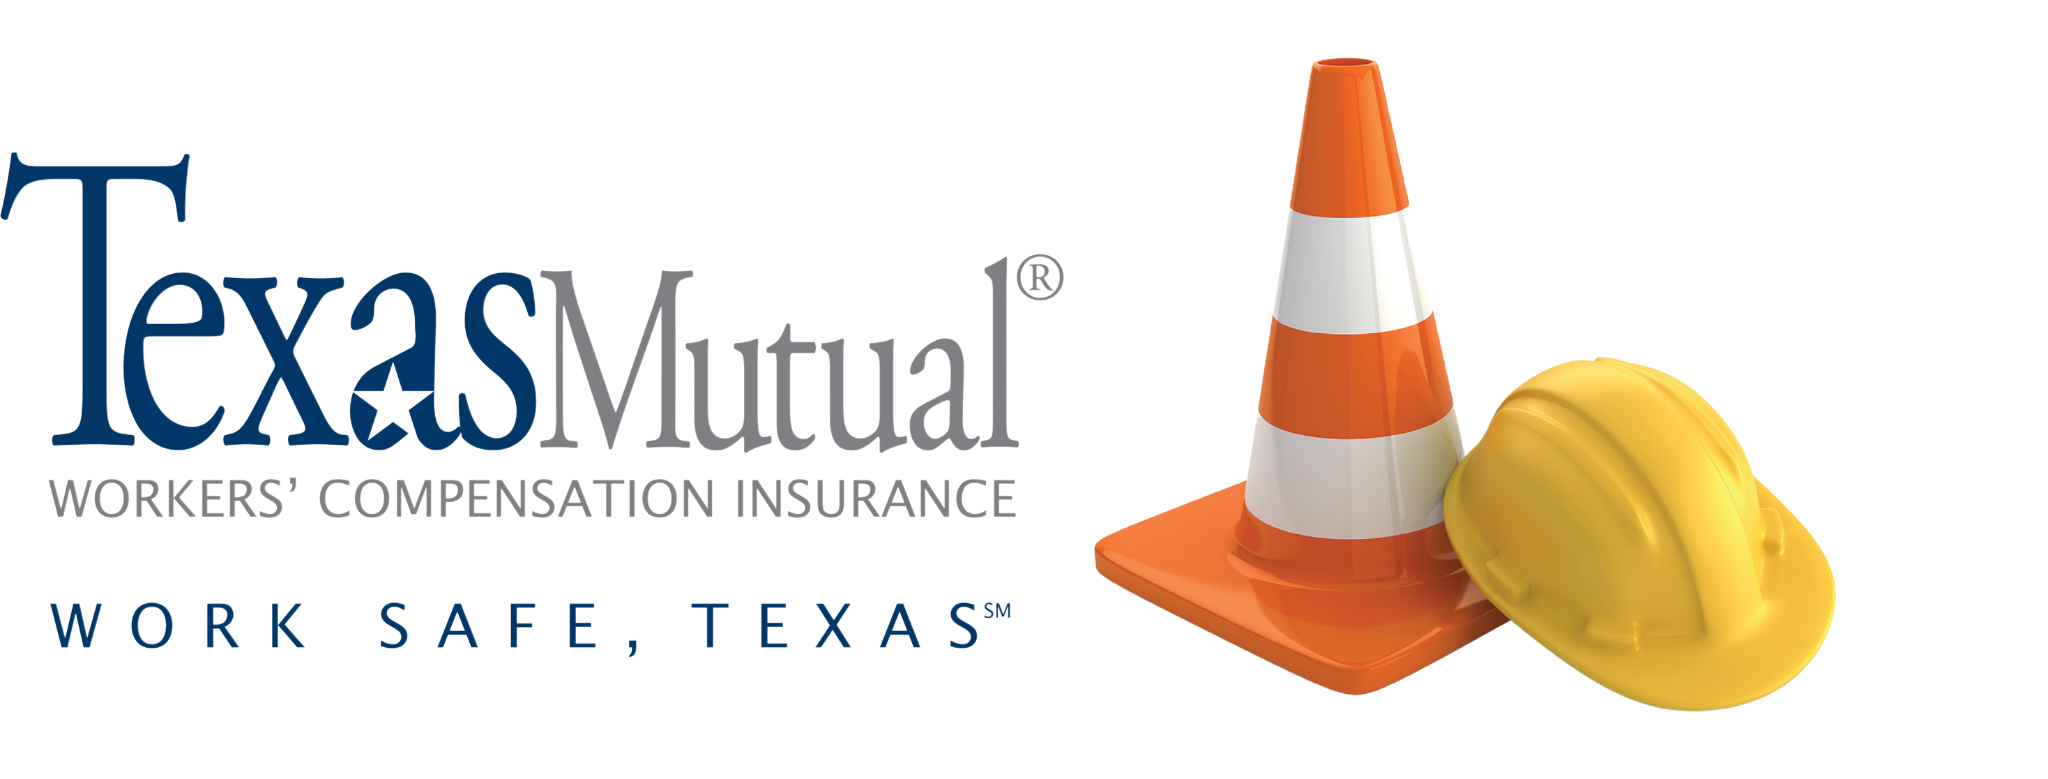 Texas Mutual Insurance Logo with hardhat and safety cone